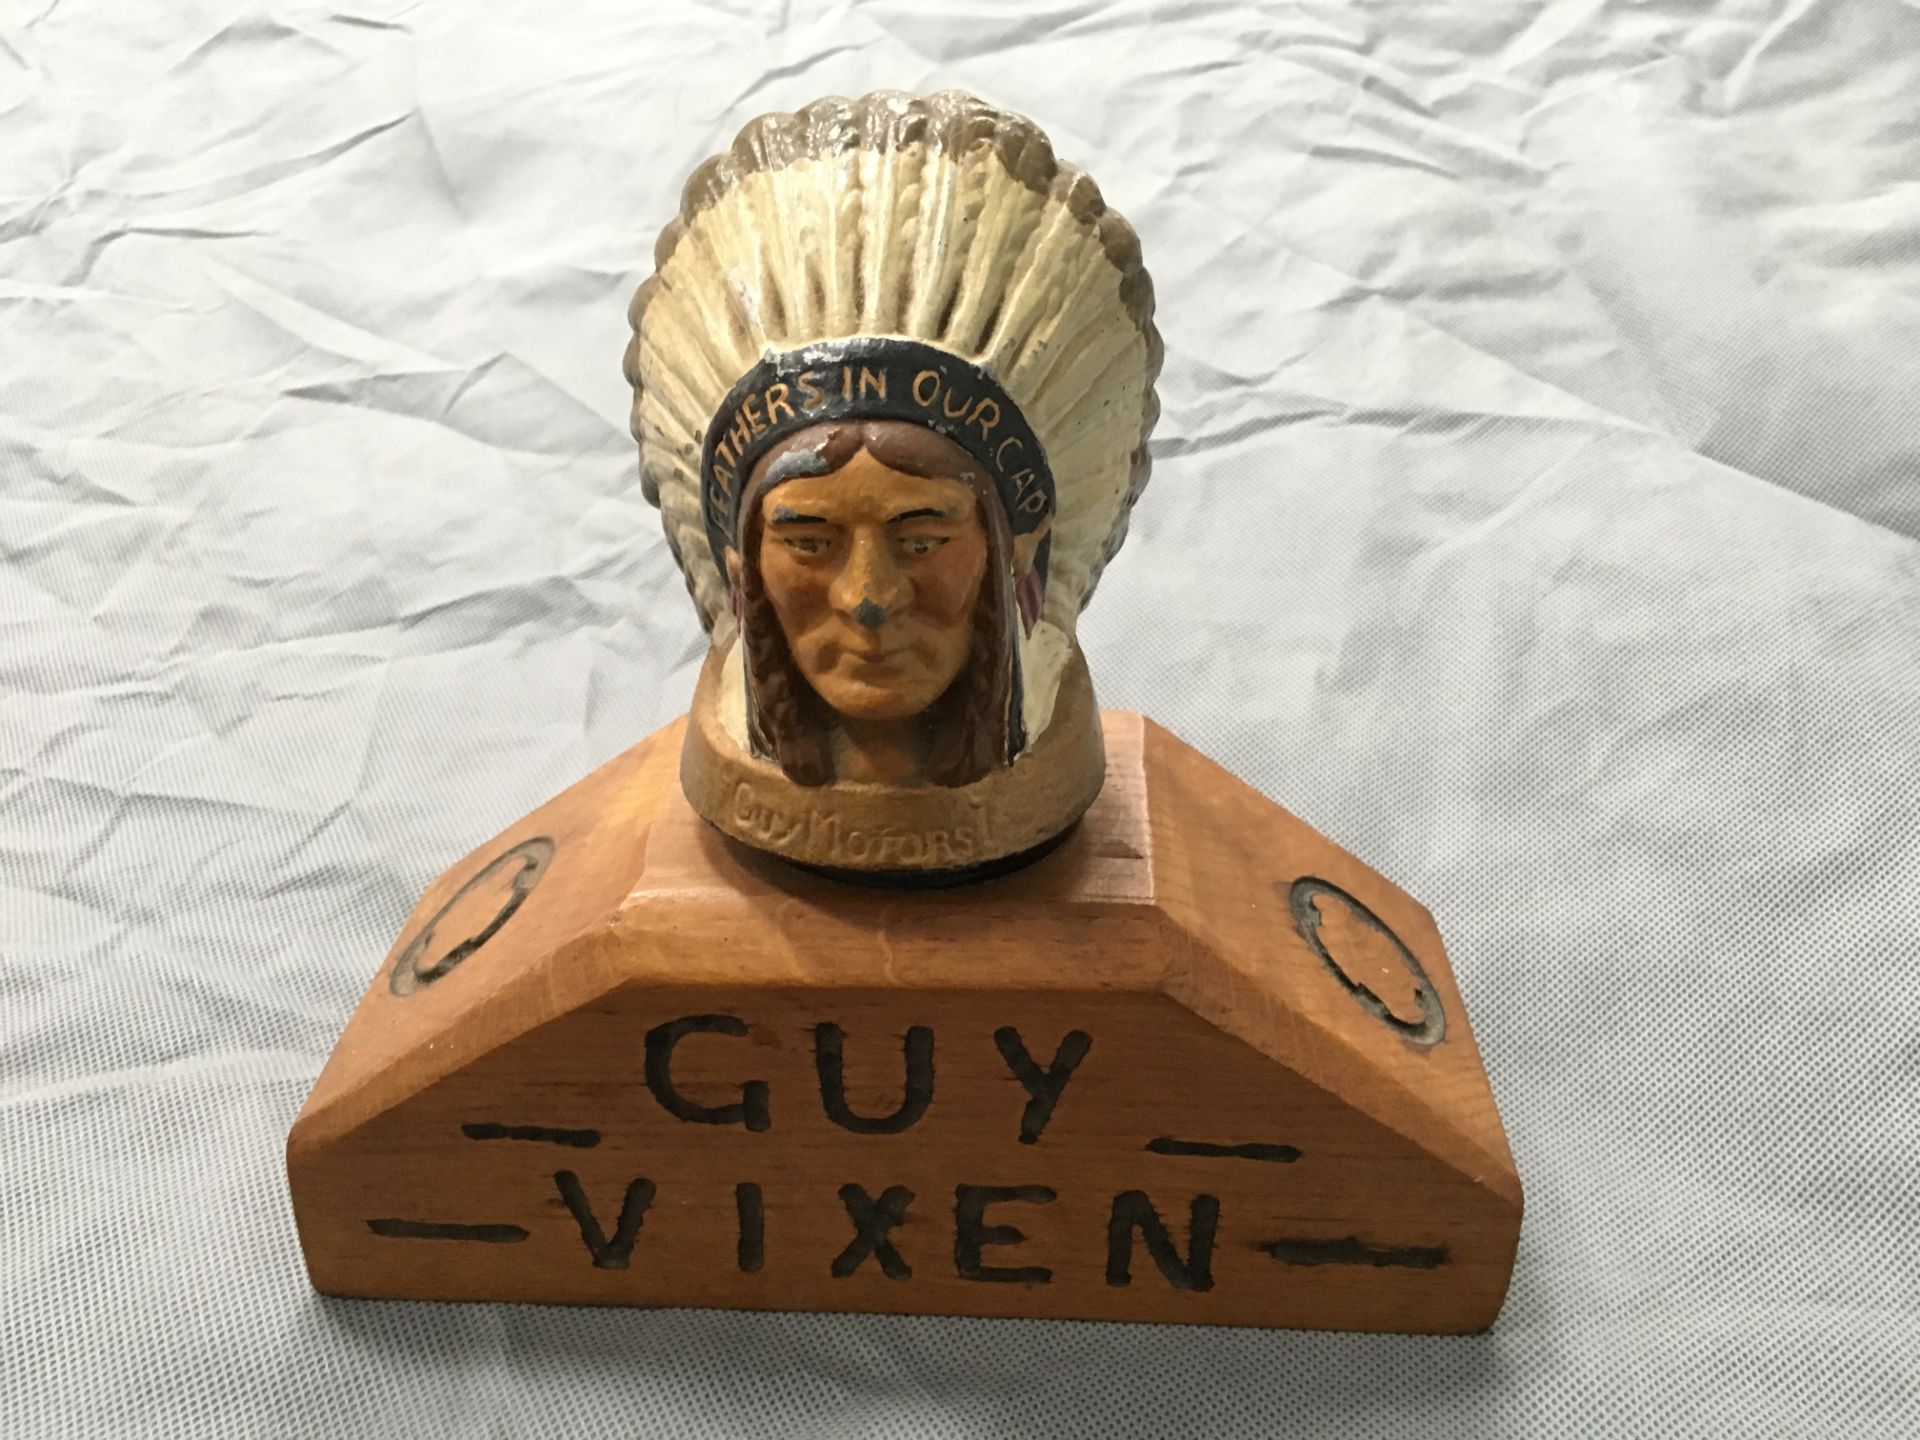 Guy Vixen radiator mascot 'Feathers in our Cap' painted and on wooden base